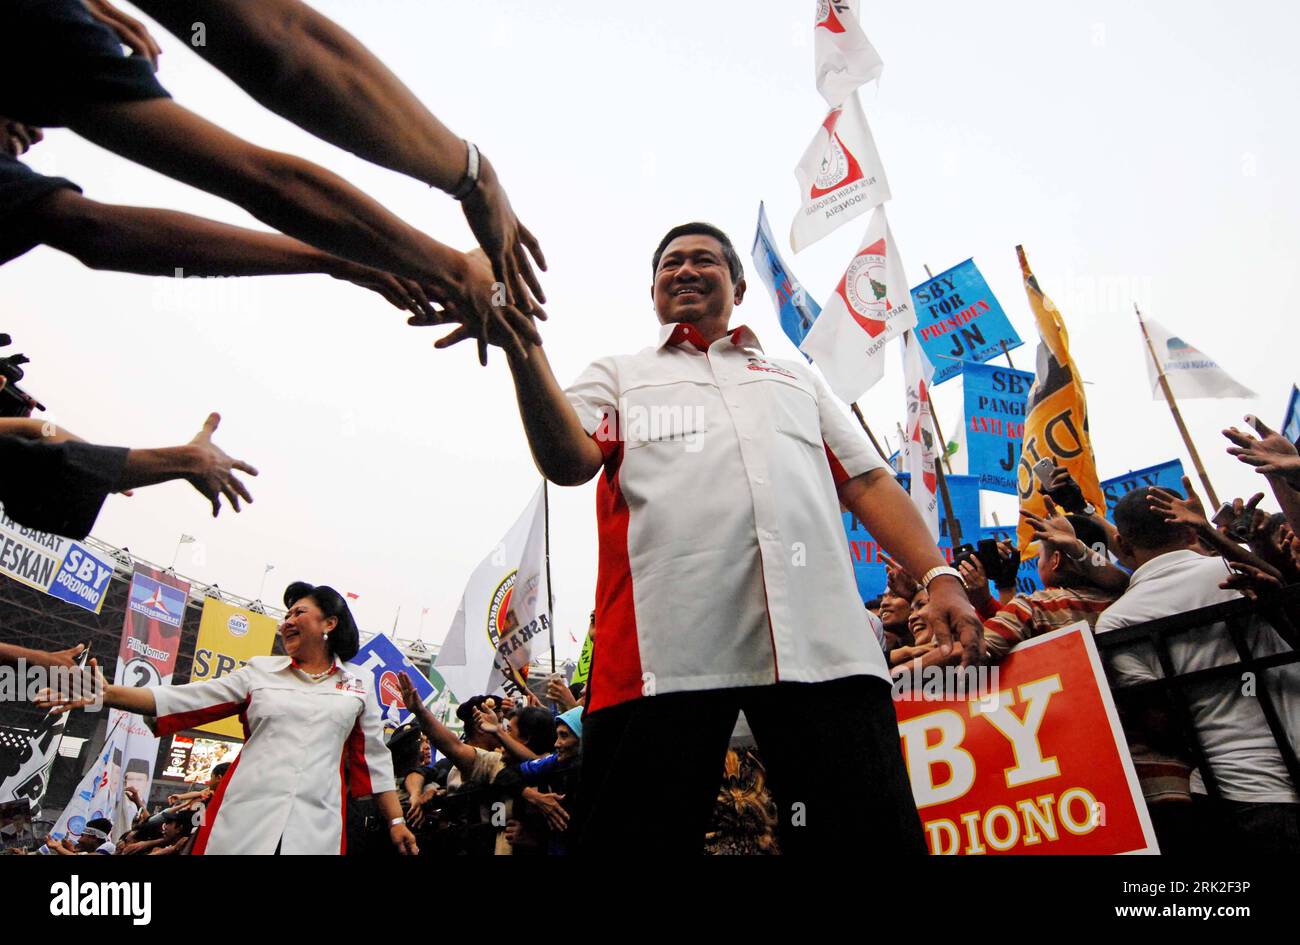 Bildnummer: 53176704  Datum: 04.07.2009  Copyright: imago/Xinhua Indonesian President Susilo Bambang Yudhoyono shakes hands with supporters during a campaign rally in Jakarta . Indonesia will hold presidential election on July 8. The three presidential candidates are President Susilo Bambang Yudhoyono, Vice President Jusuf Kalla and Former President Megawati Soekarnoputri. (Xinhua/Yue Yuewei) (xjq) People Politik Präsidentschaftswahl premiumd  kbdig xub (090704) -- JAKARTA,  (Xinhua) -- Indonesische Präsident Susilo Bambang Yudhoyono  mit Fans anläßlich einer Kampagne Kundgebung in Jakarta . I Stock Photo